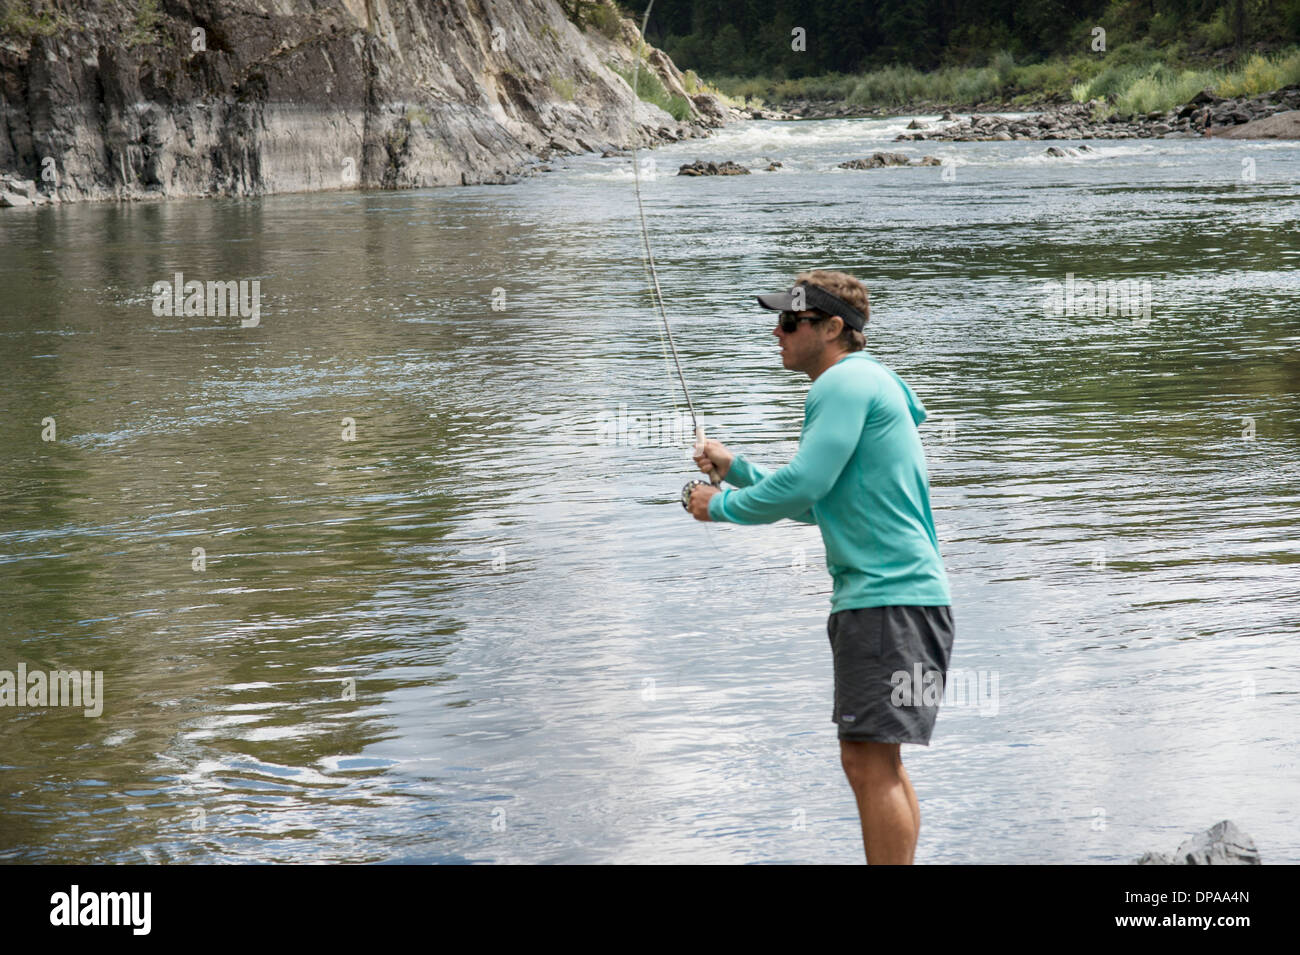 Man fly fishing in the Clark Fork River in Montana. Stock Photo